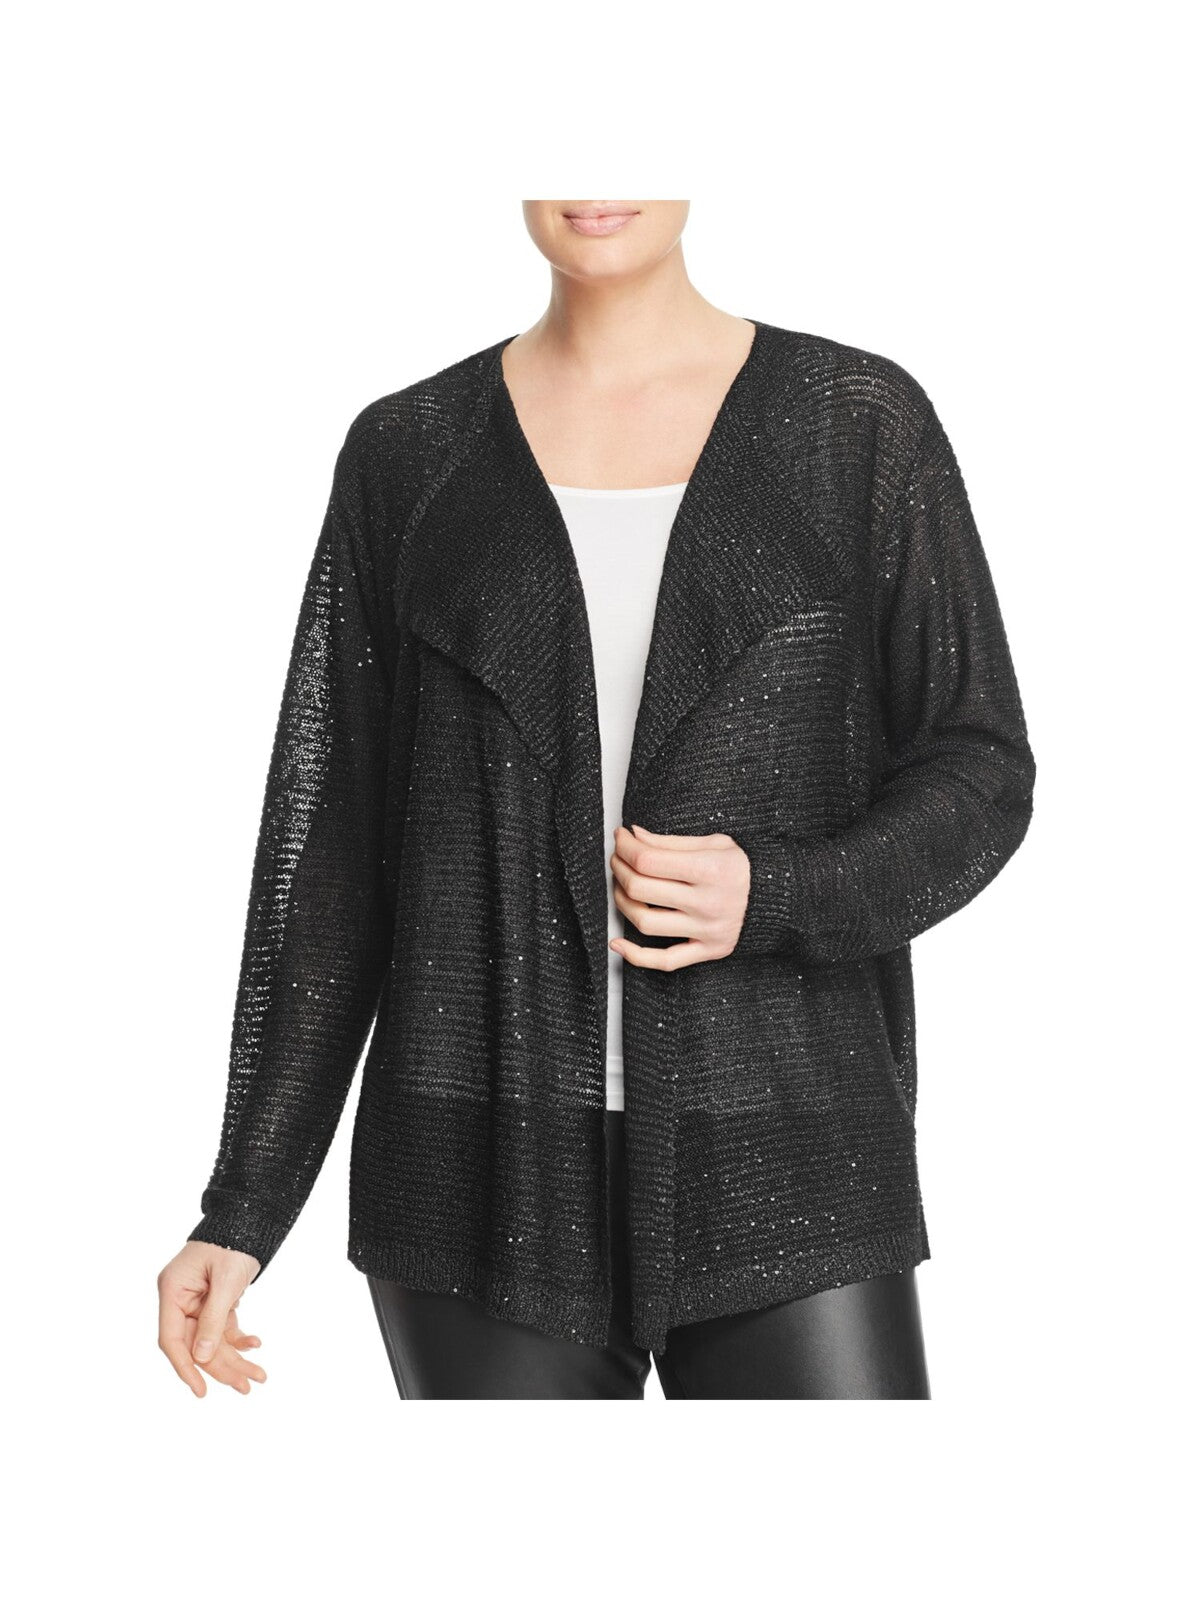 SIONI Womens Black Knit Sequined Chiffon Layered Long Sleeve Open Cardigan Party Sweater Plus 1X